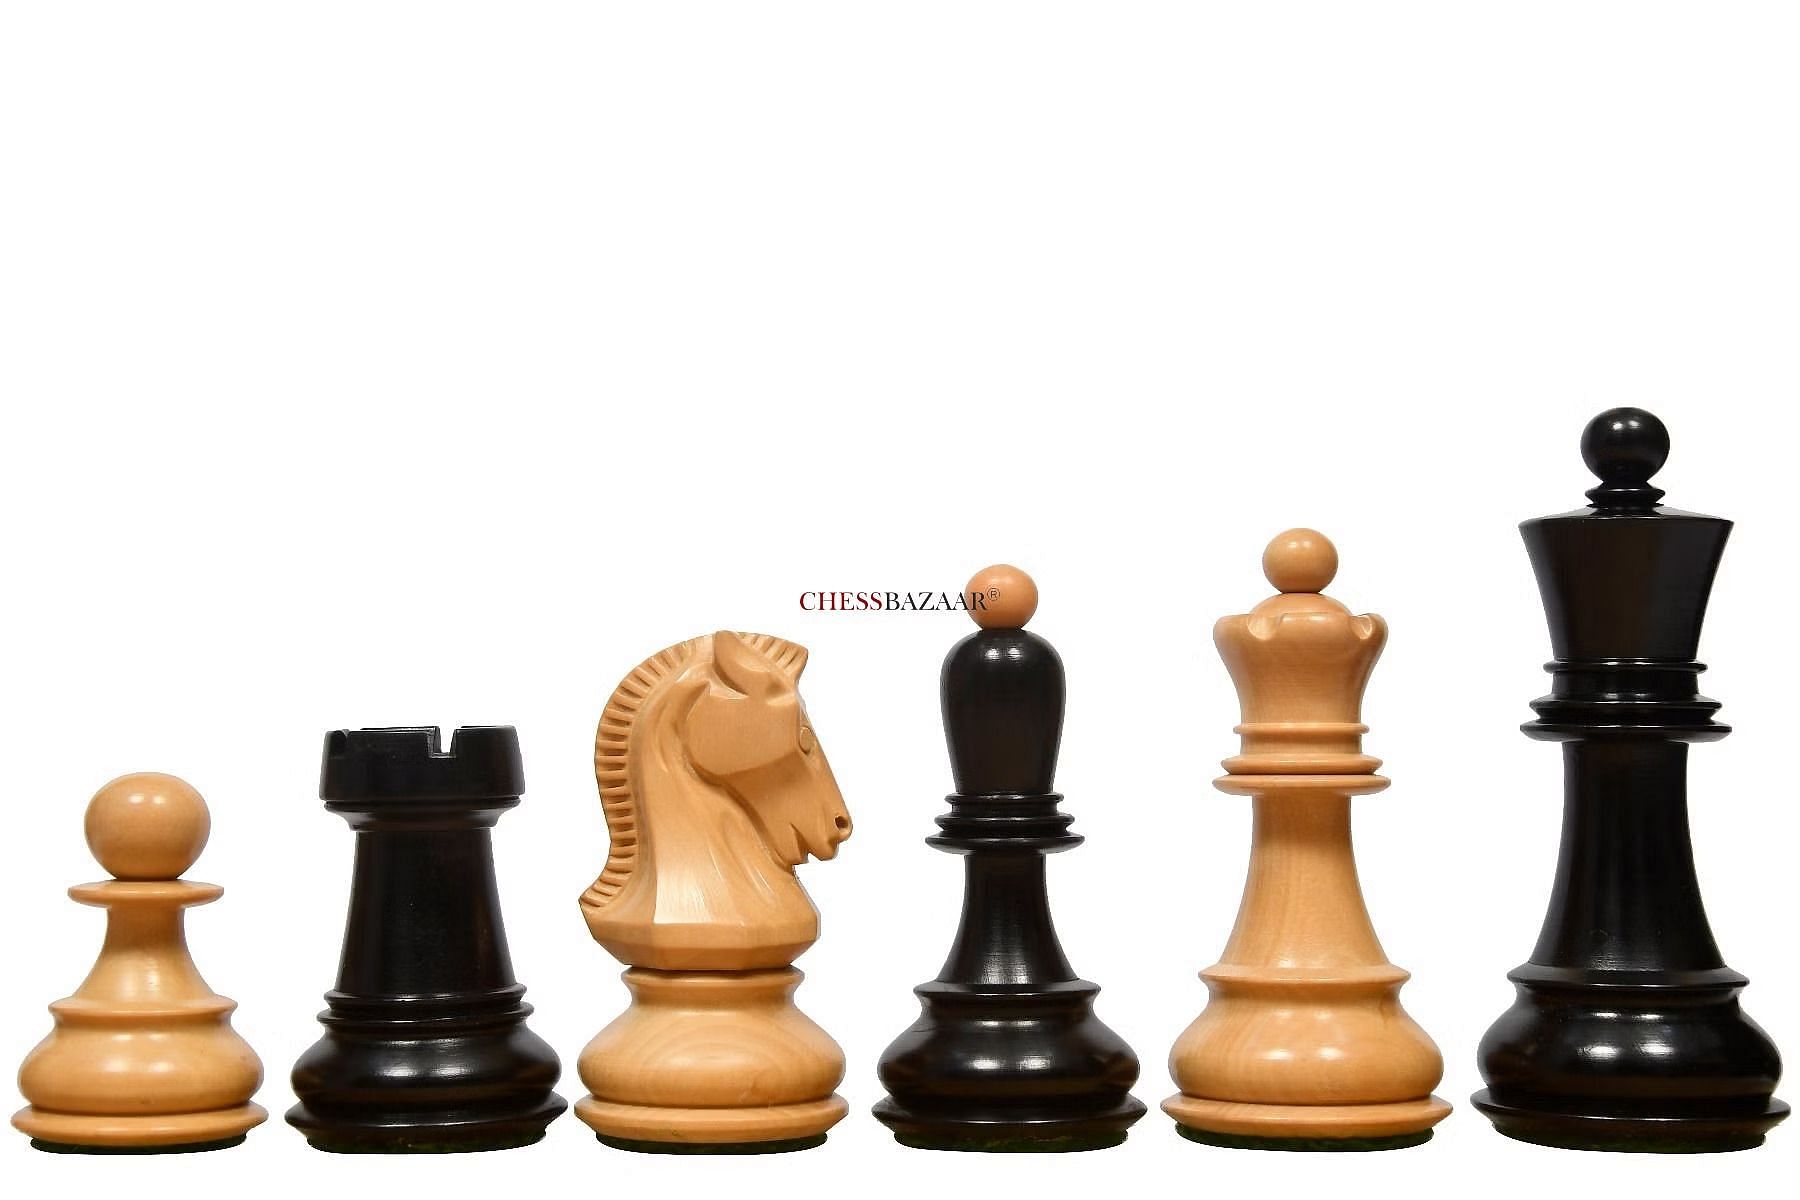  World Chess Championship Set Full Official Tournament Extra  Queens Unique Sets for Kids and Adults Board Game Weighted Pieces (Extra  Queens) for 2 players : Toys & Games